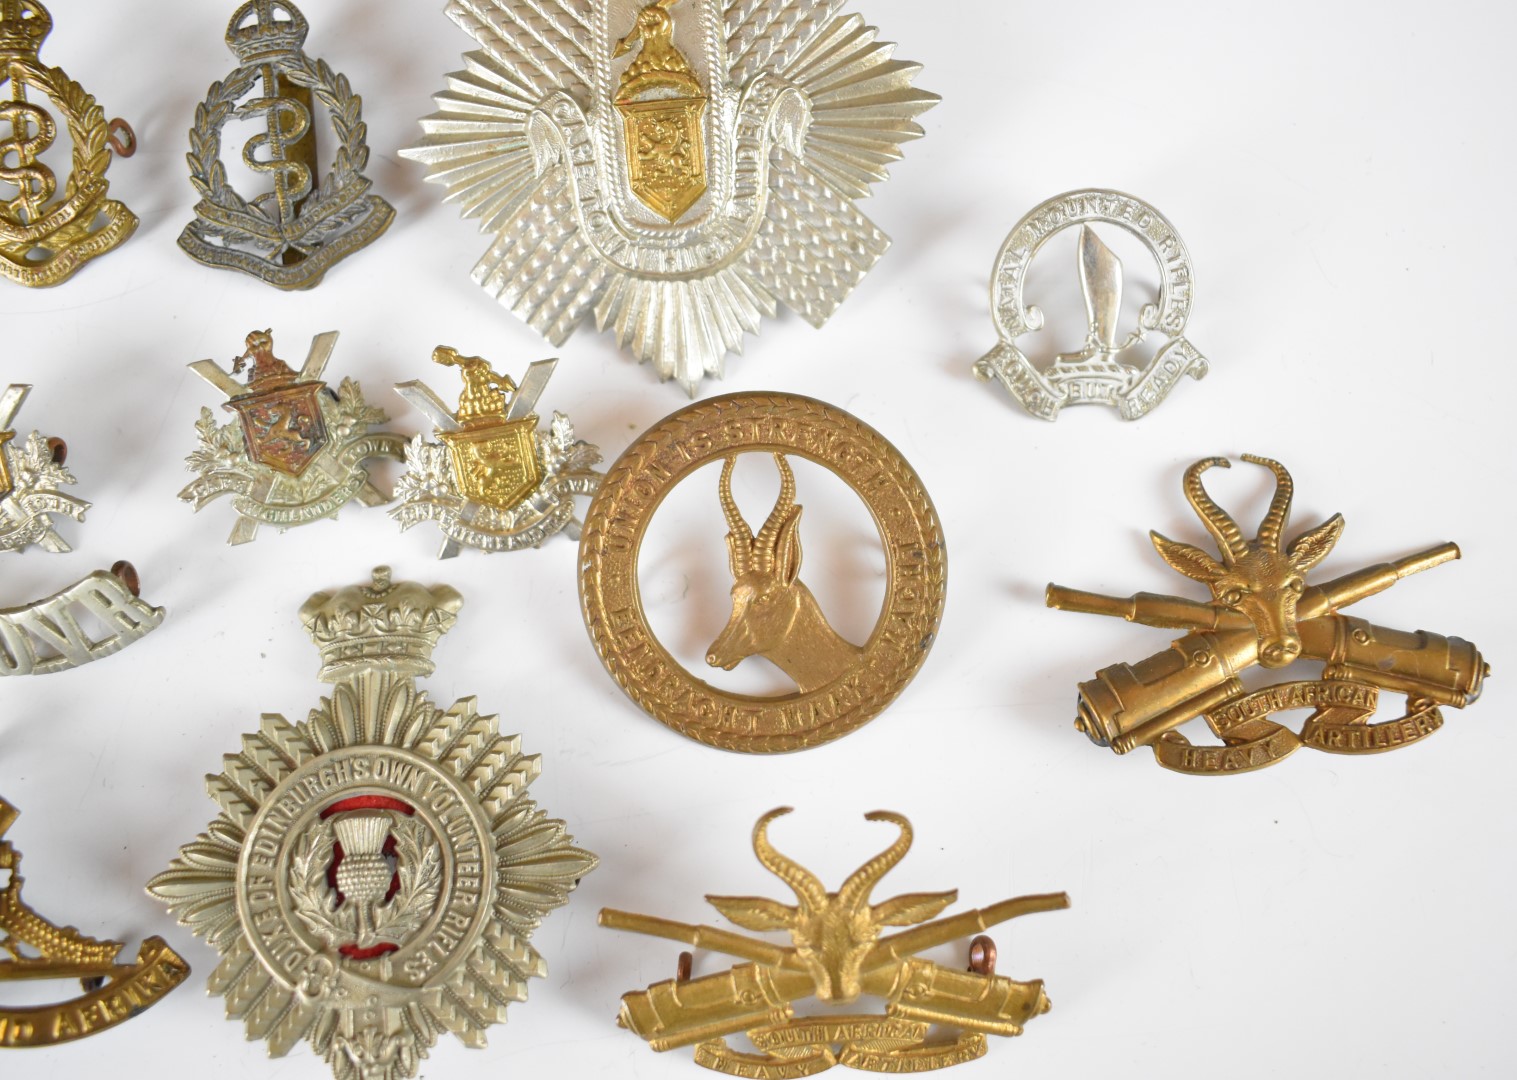 Approximately 20 South African badges including Cape Town Highlands, Duke of Edinburgh's Own - Image 2 of 6